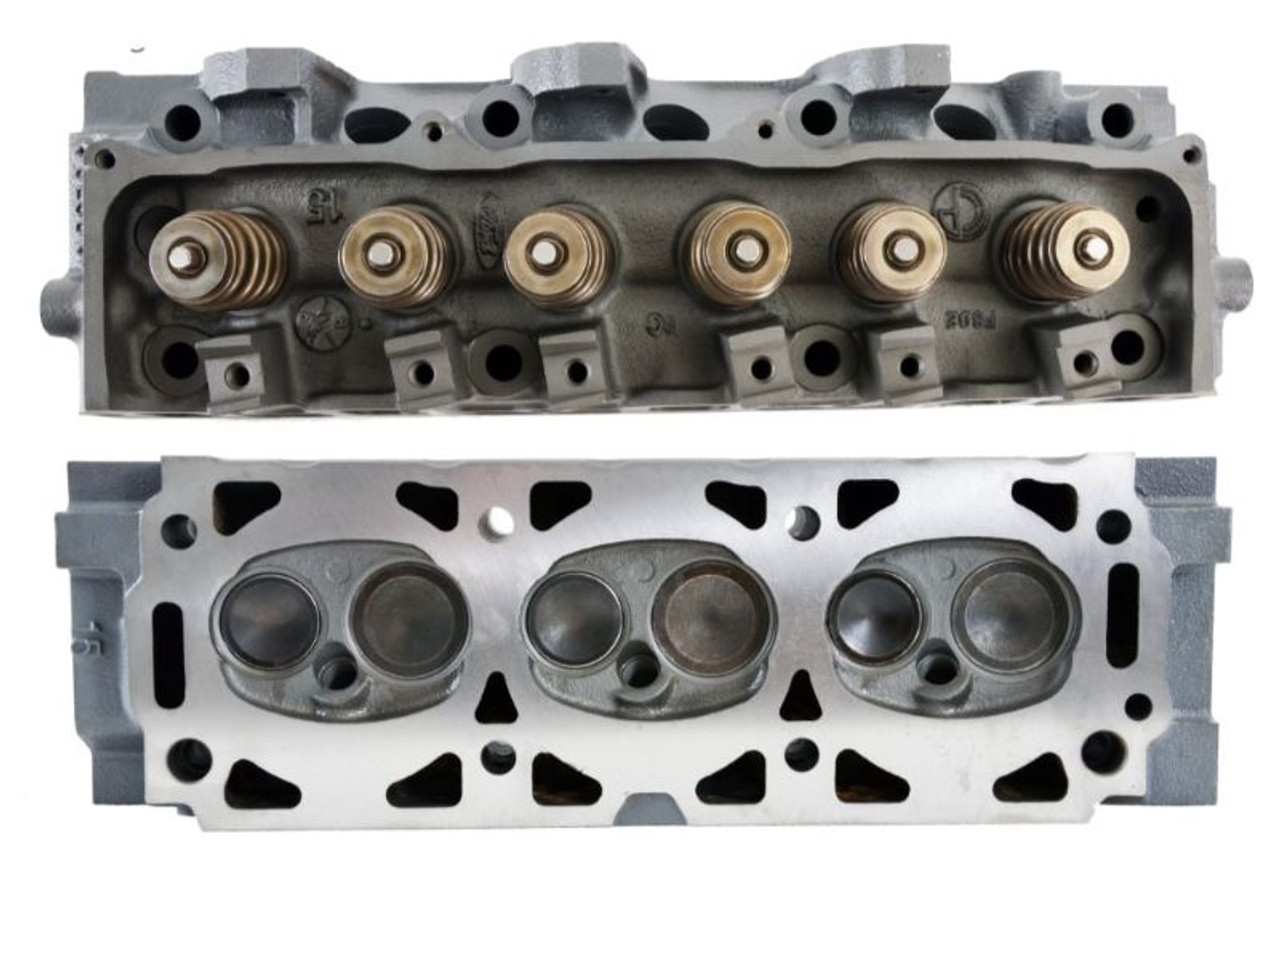 Cylinder Head Assembly - 2005 Ford Ranger 3.0L (CH1027R.D35)